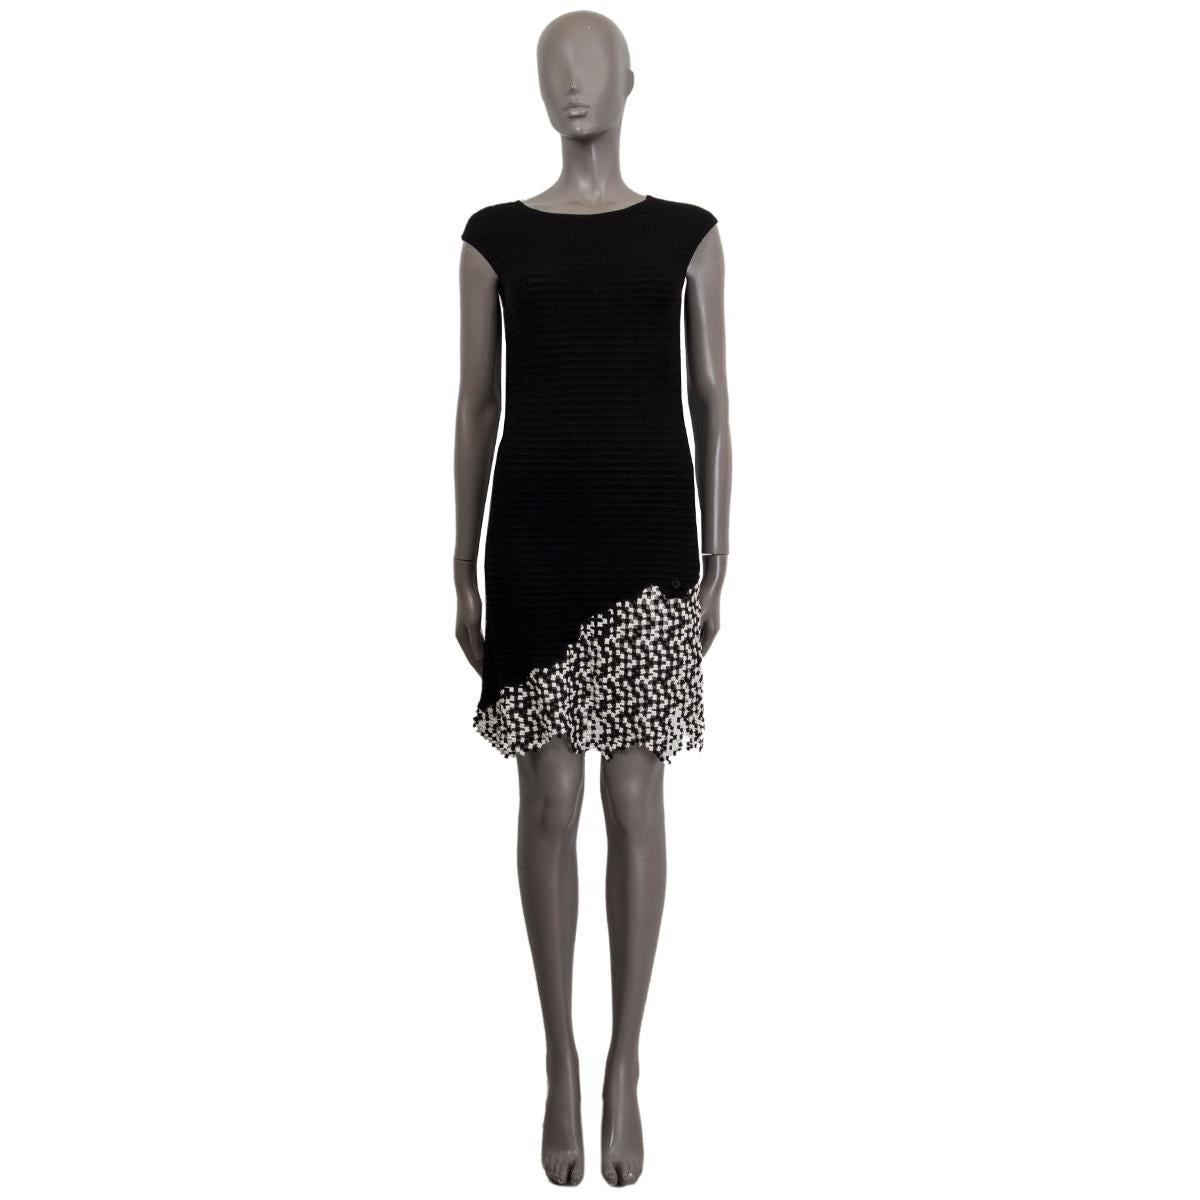 100% authentic Chanel sleeveless knit sheath dress in black viscose (66%), cotton (20%) and nylon (14%) with a round neck. Has  black and white square knit details at the botton. Unlined. Has been worn and is in excellent condition. 

2011